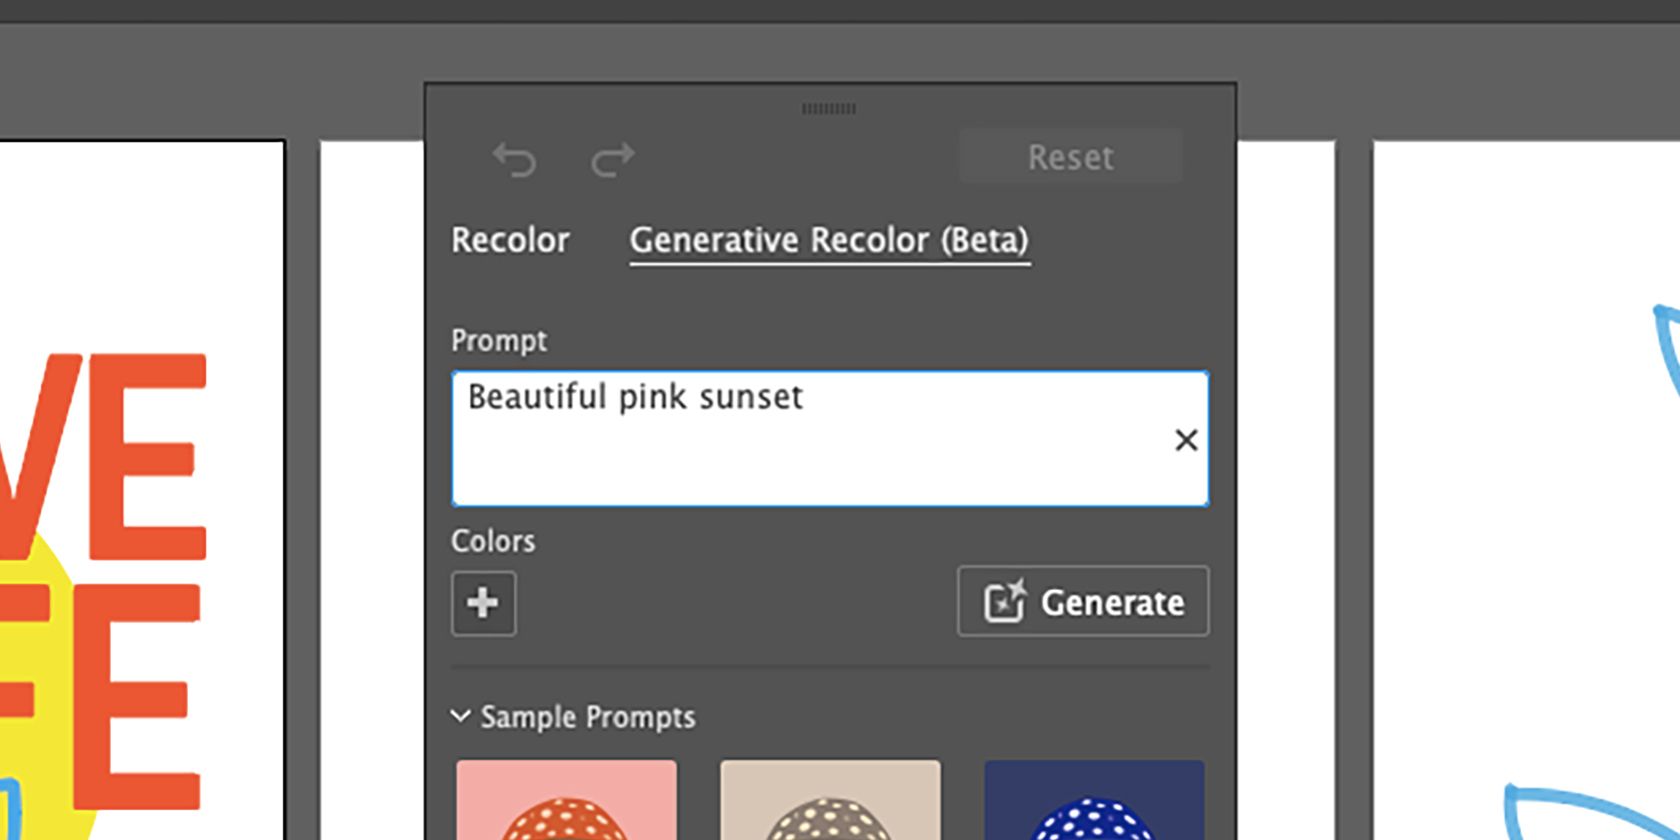 How to Use the Generative Recolor Tool in Adobe Illustrator